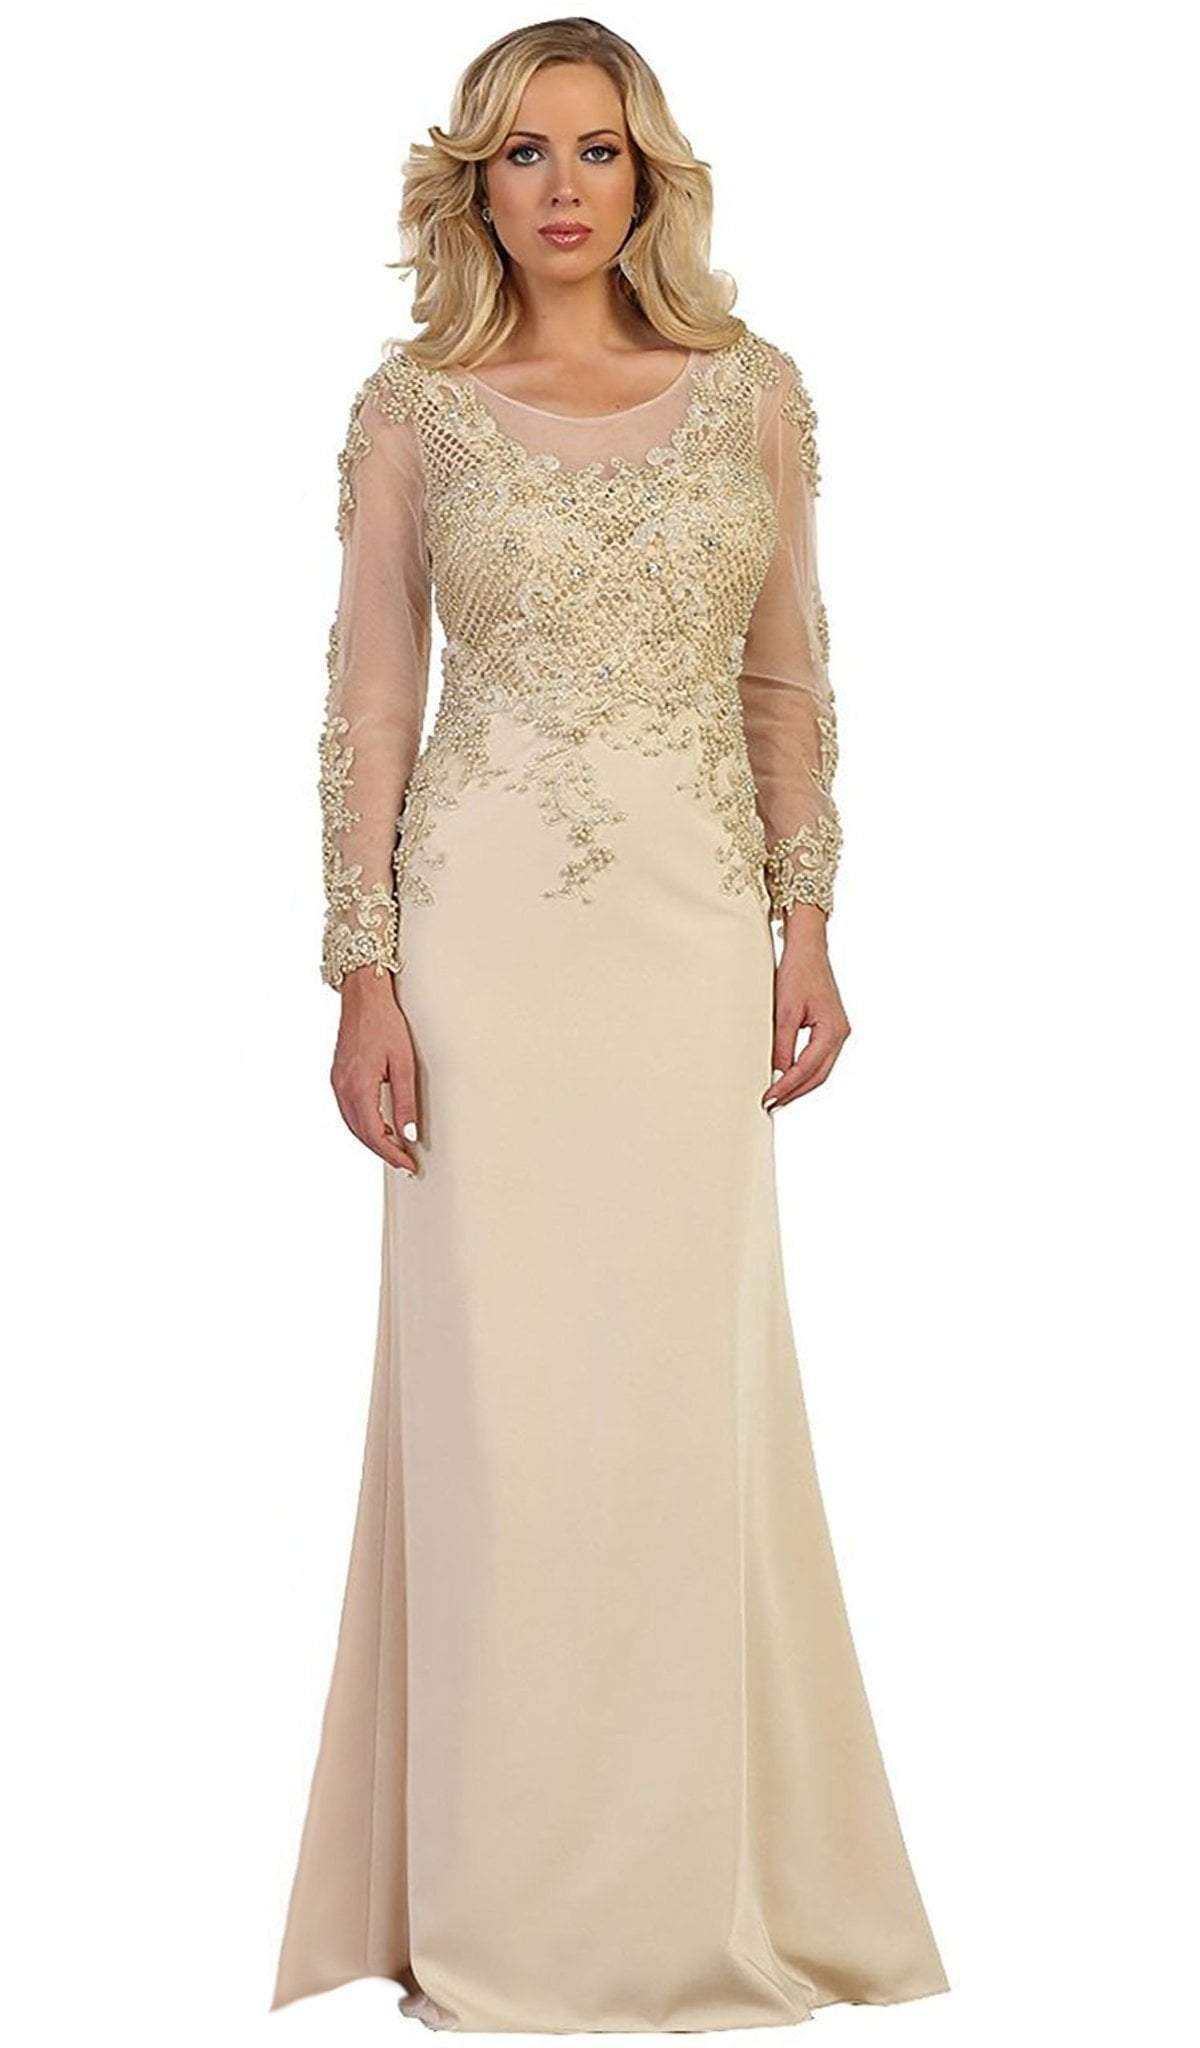 May Queen - RQ7594 Embellished Long Sleeve Illusion Scoop Sheath Mother of the Bride Gown Special Occasion Dress S / Champagne